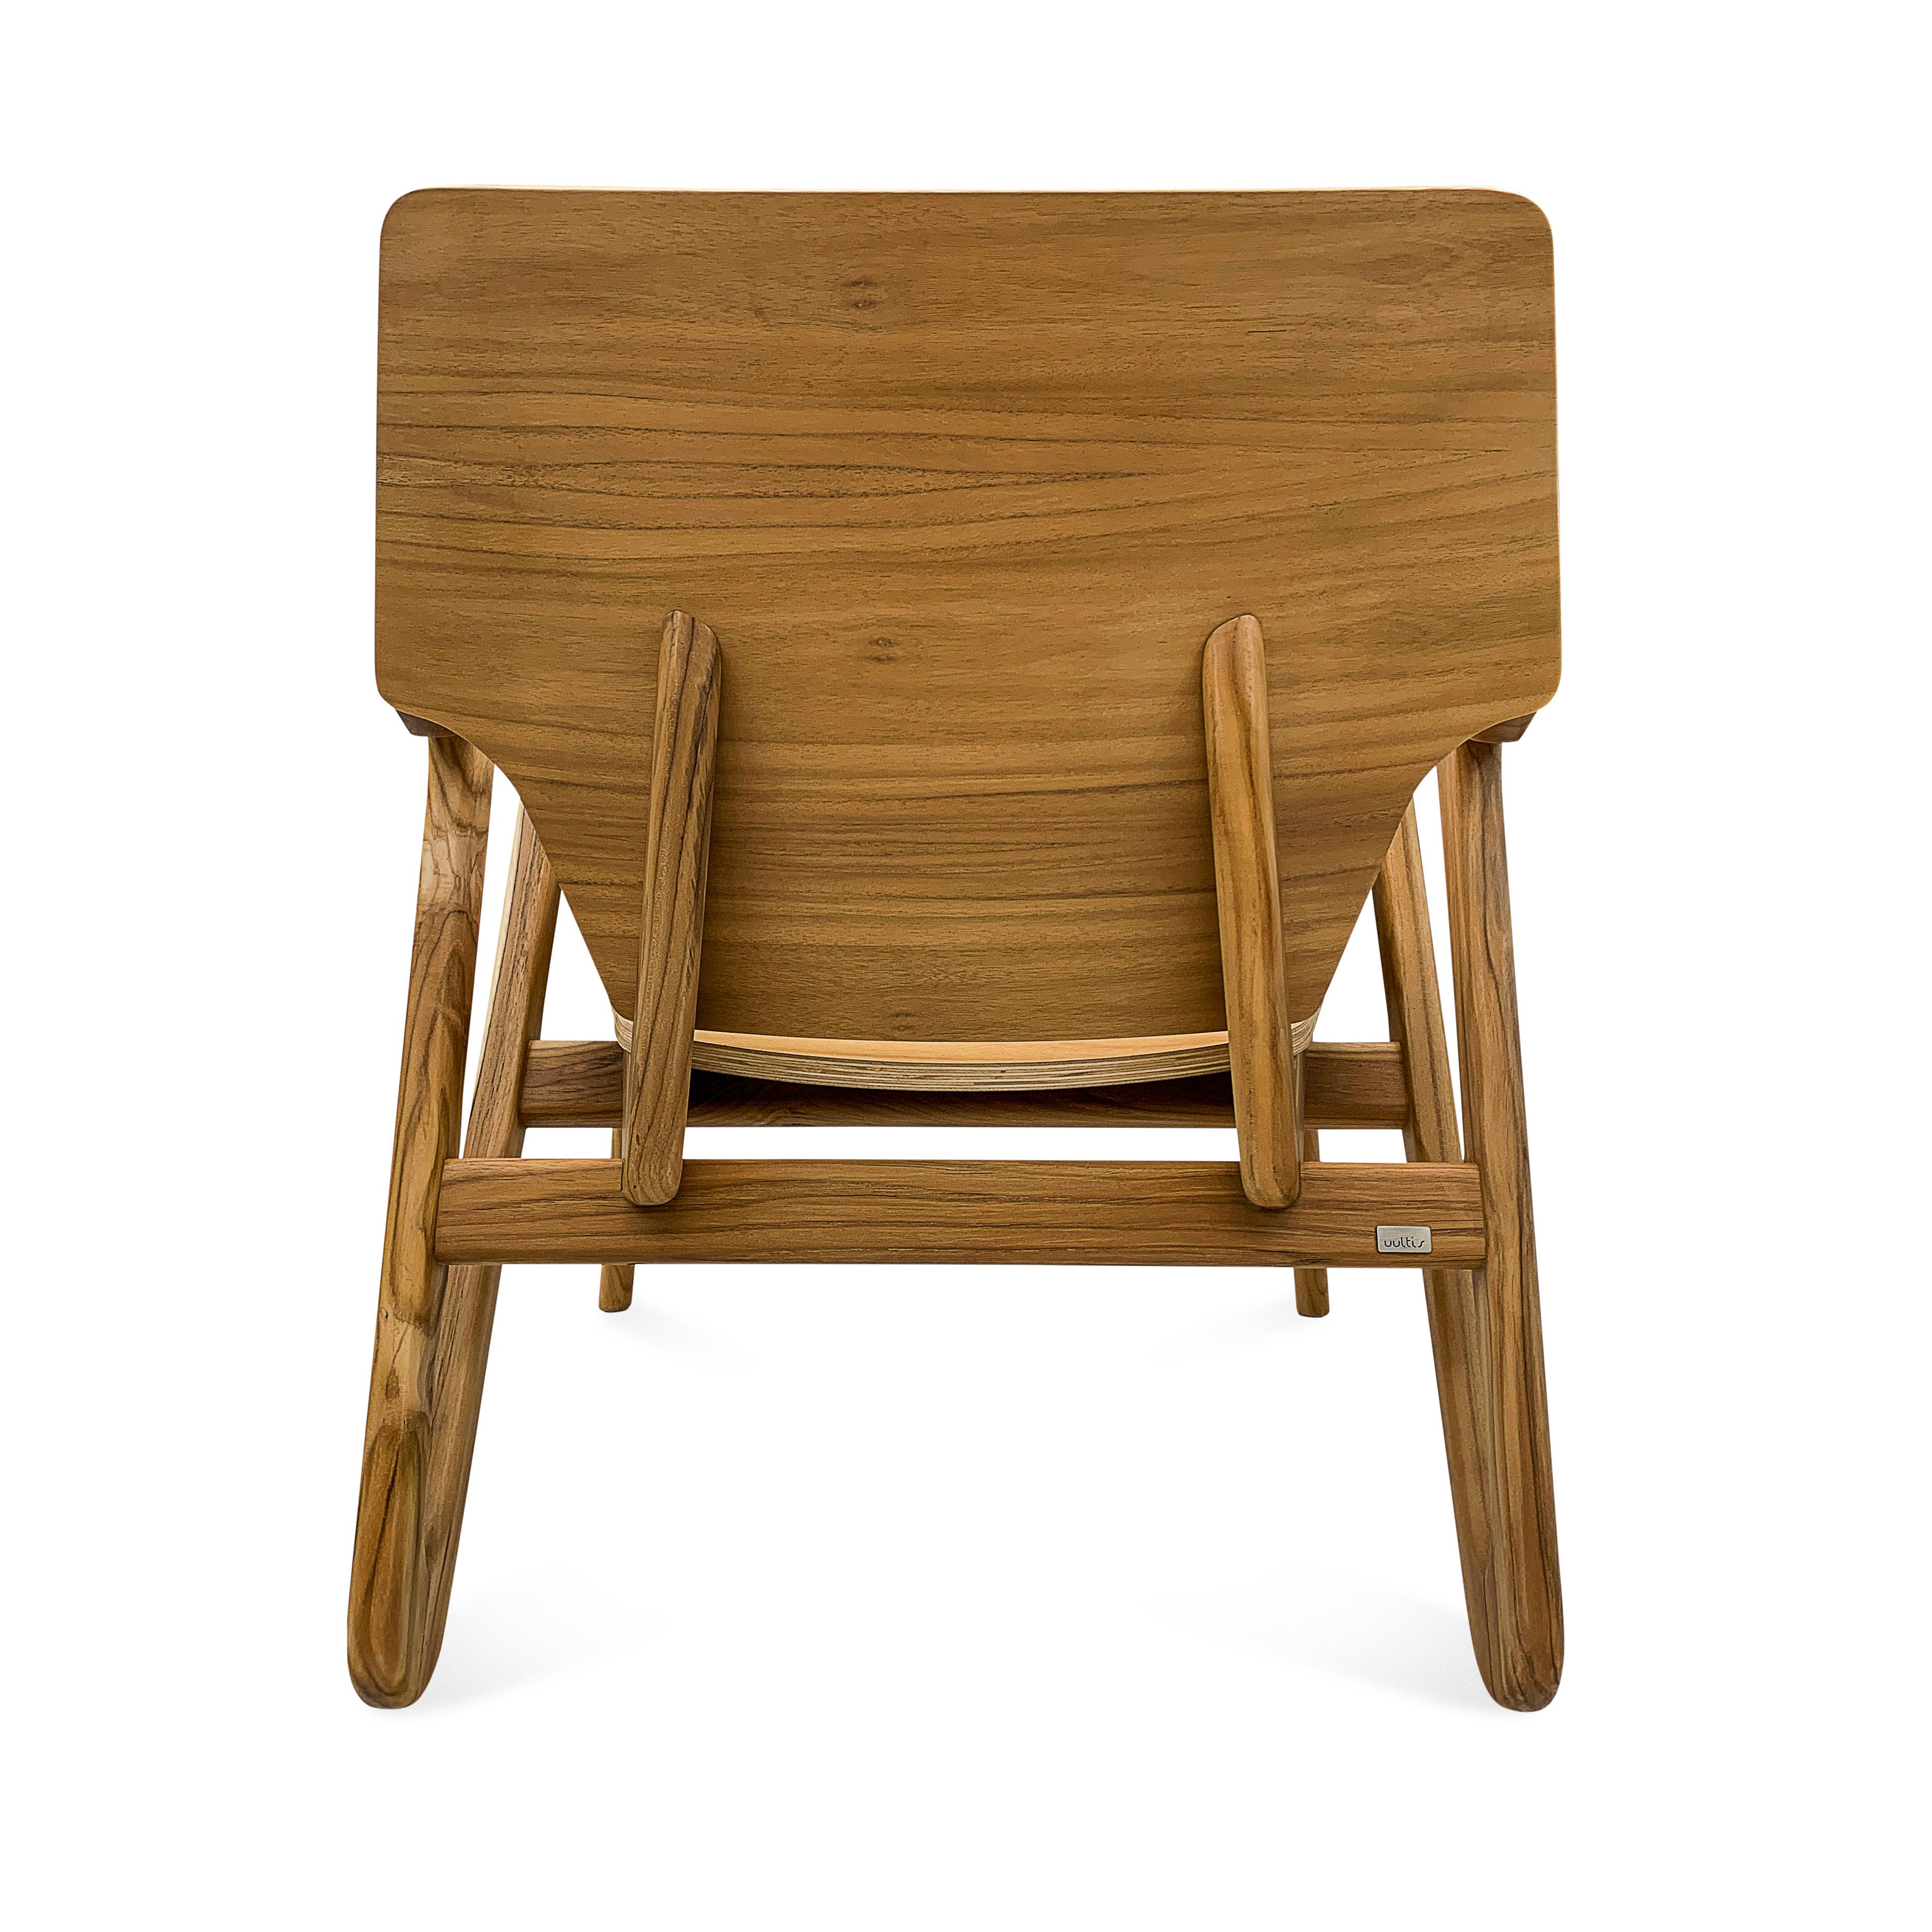 Velo Armchair with Shaped Seat and Shaped Back in Teak Wood Finish For Sale 1